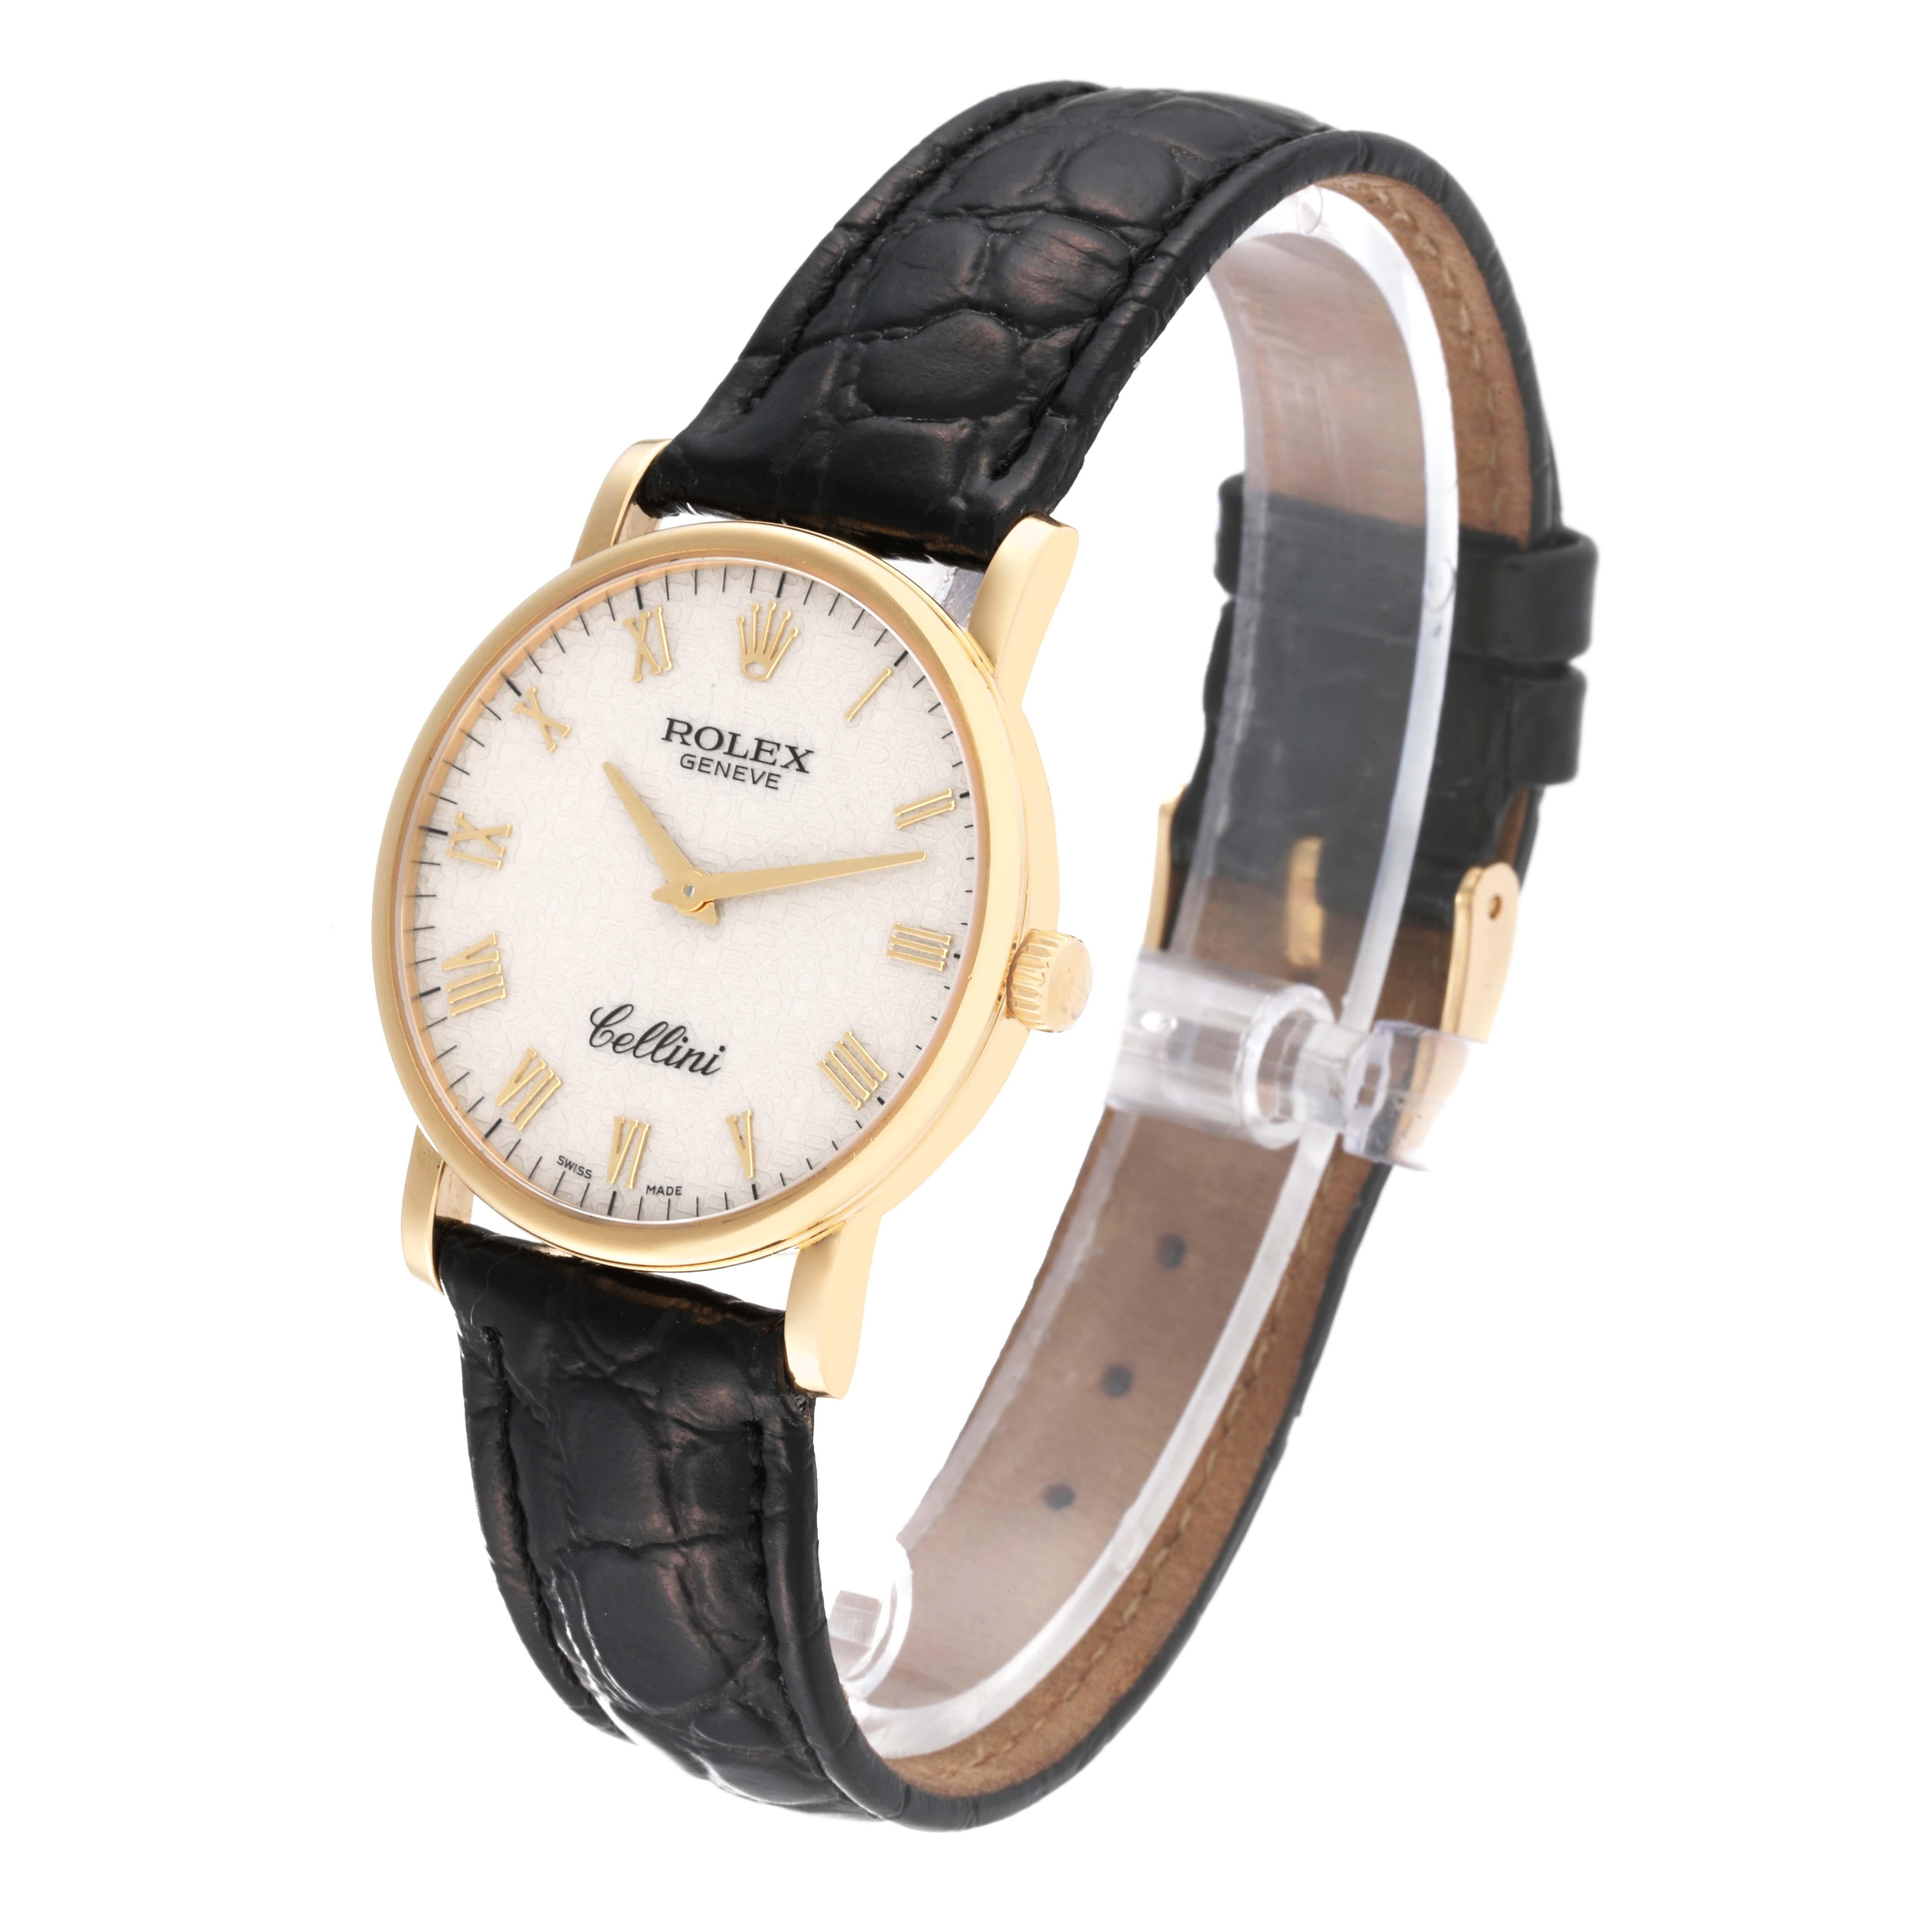 Men's Rolex Cellini Classic Yellow Gold Ivory Anniversary Dial Mens Watch 5115